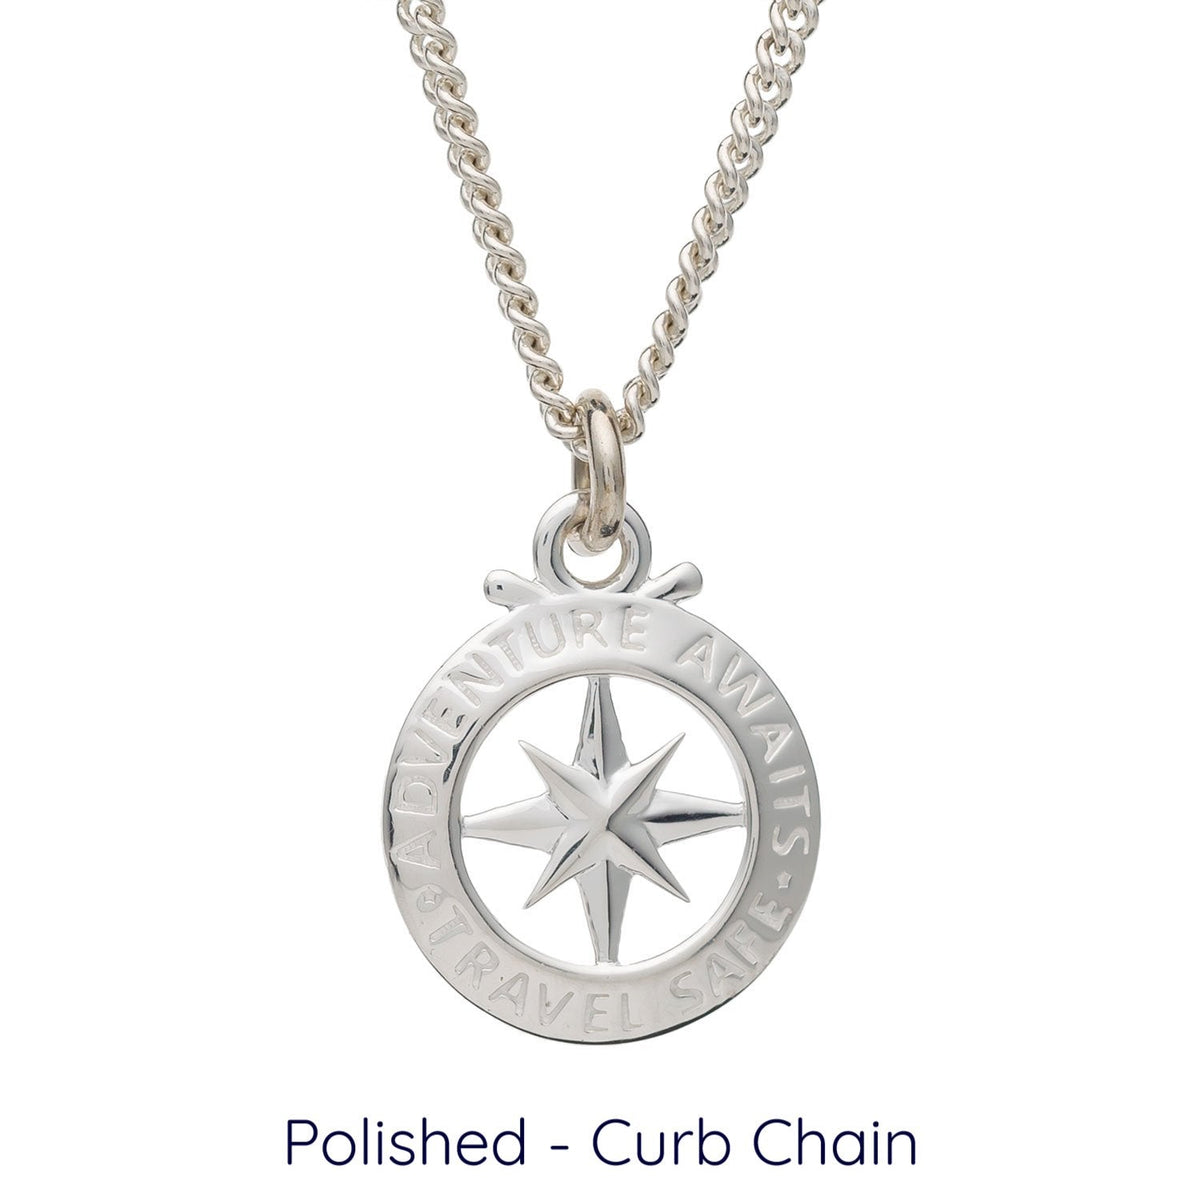 Hollow Compass Silver Necklace for men and women travel safe from off the map brighton